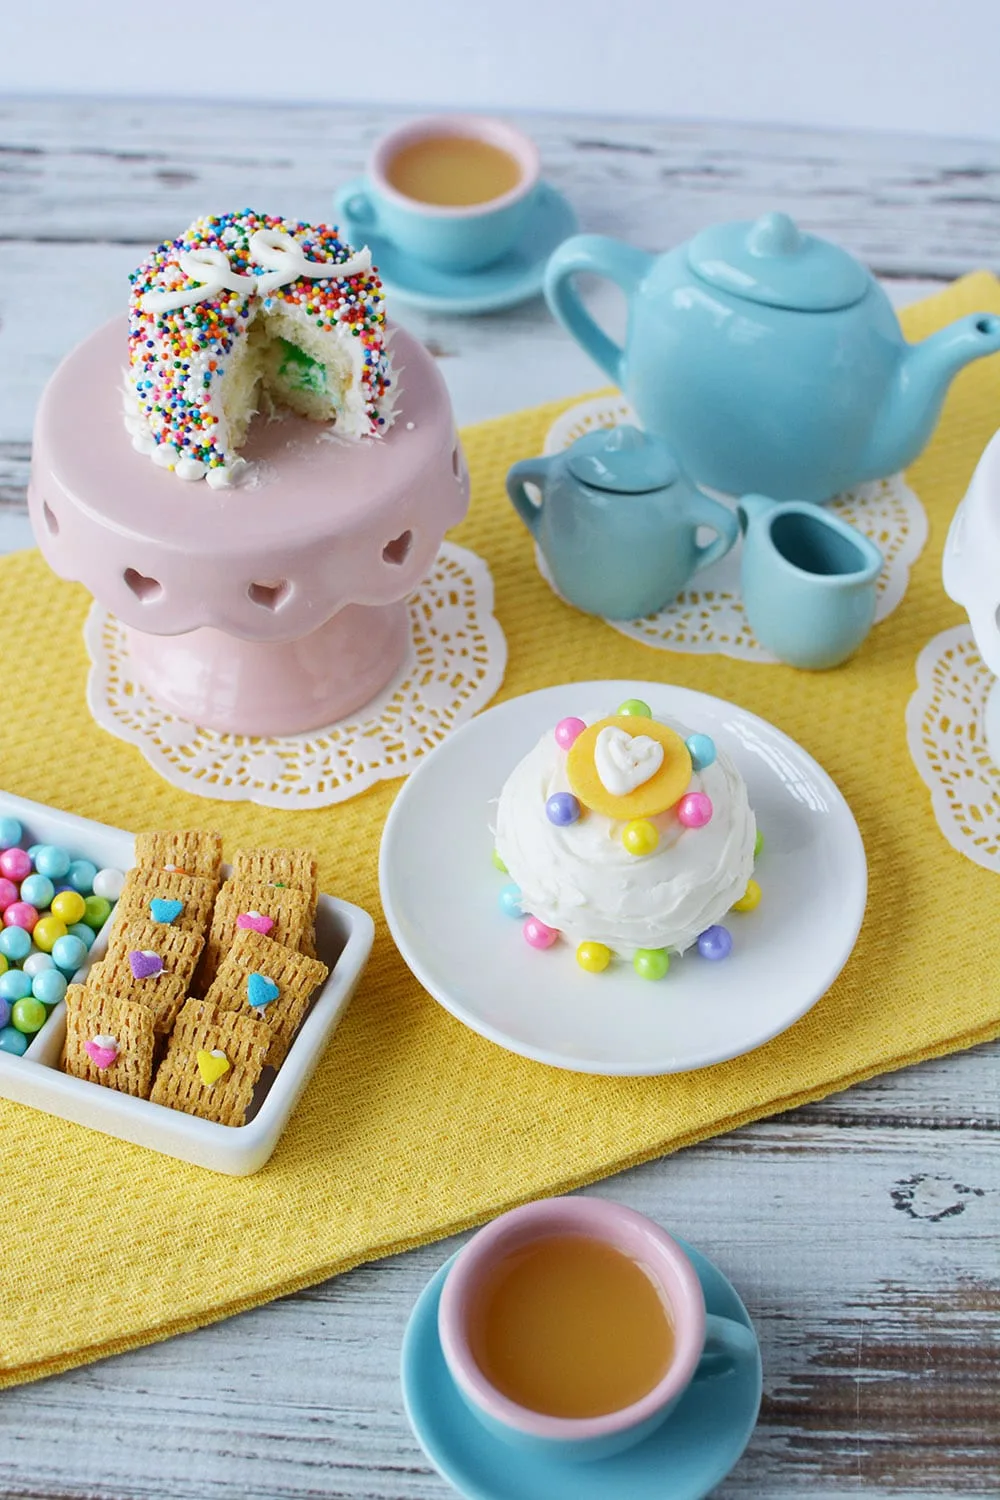 Tea Lovers, This Tea Party Cake Is The Best Cake Ever! -